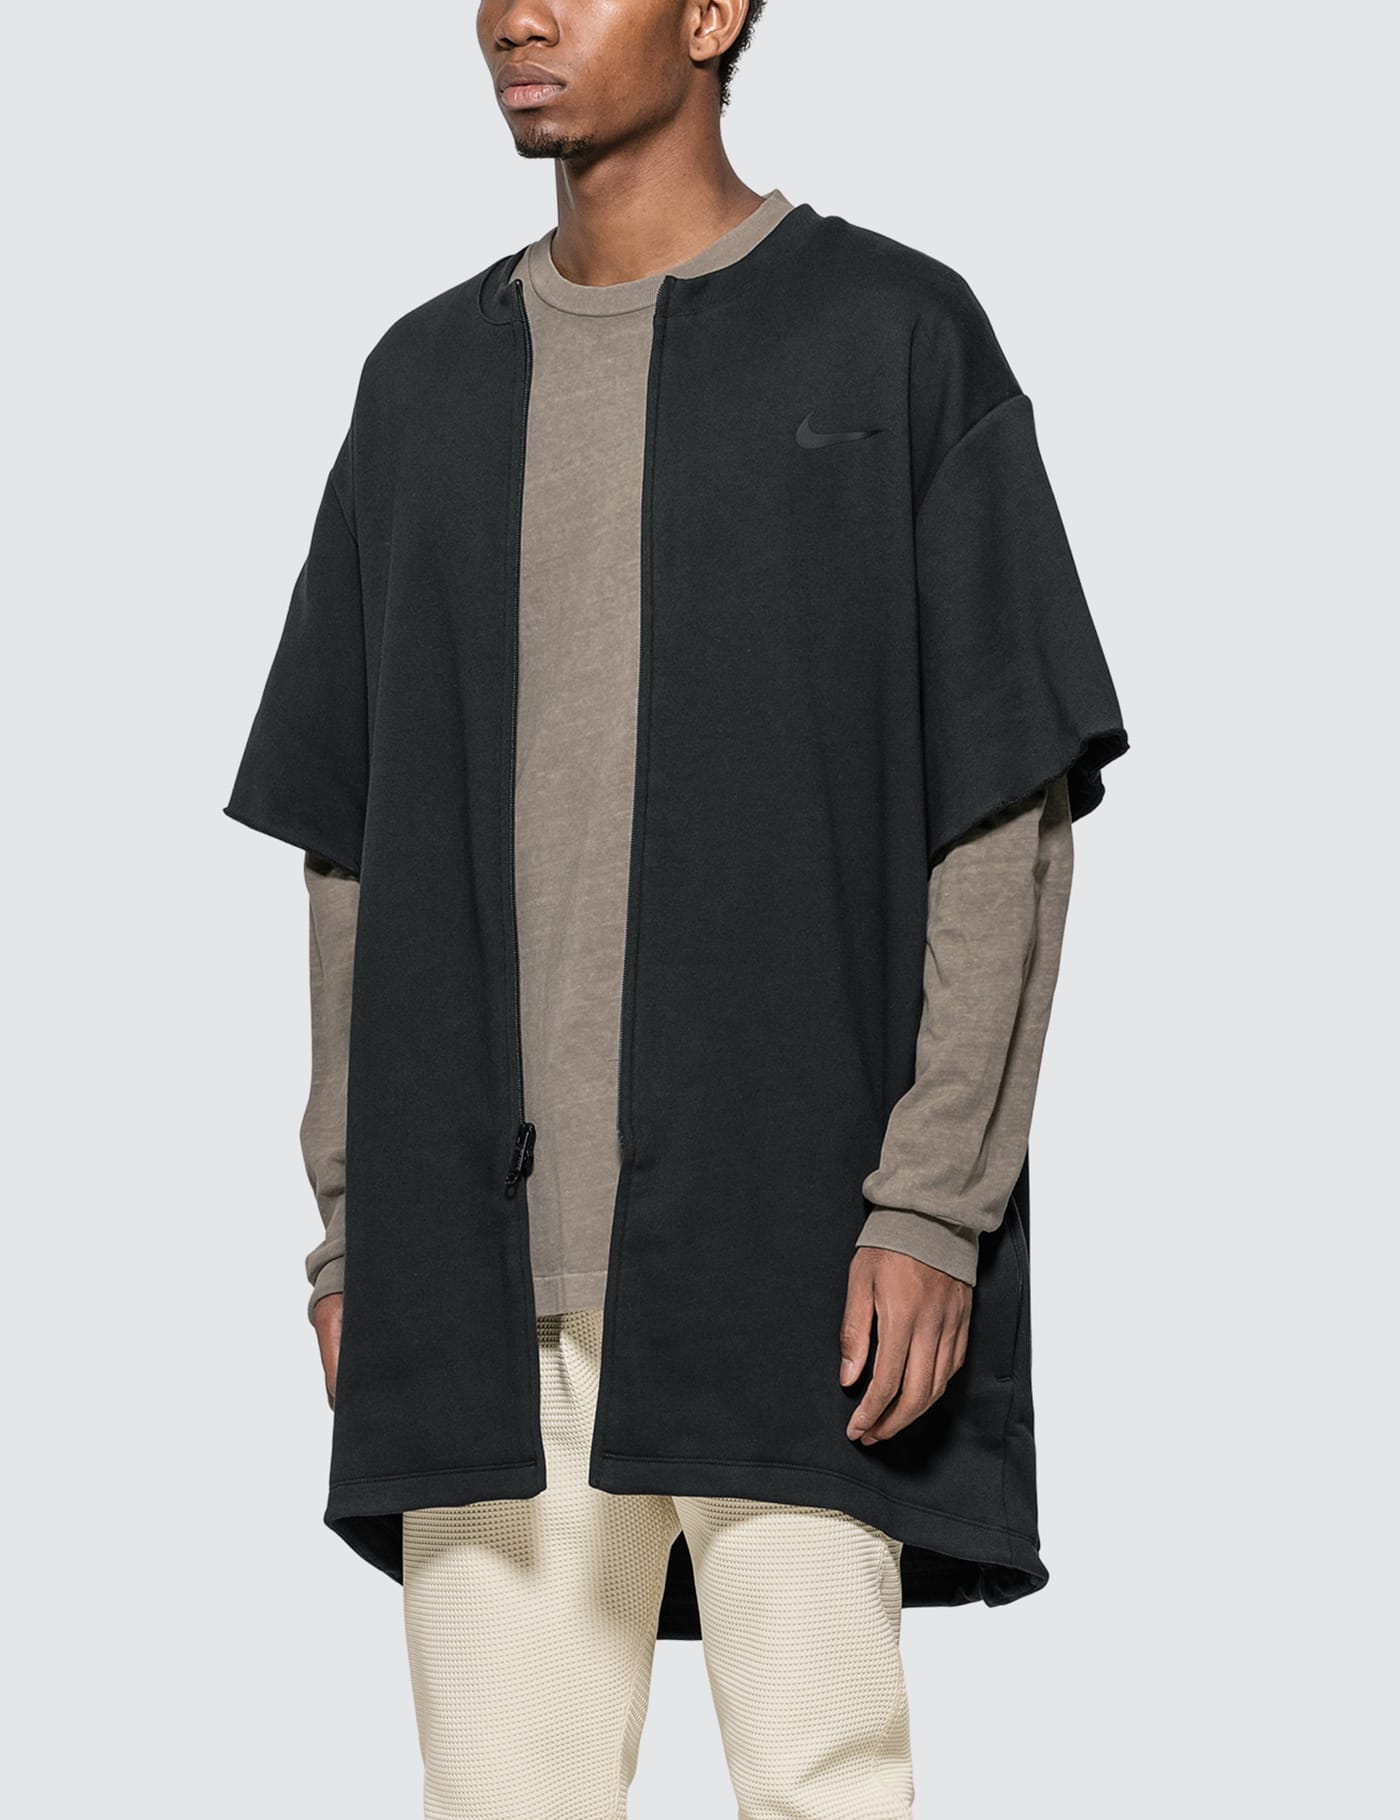 fear of god warm up